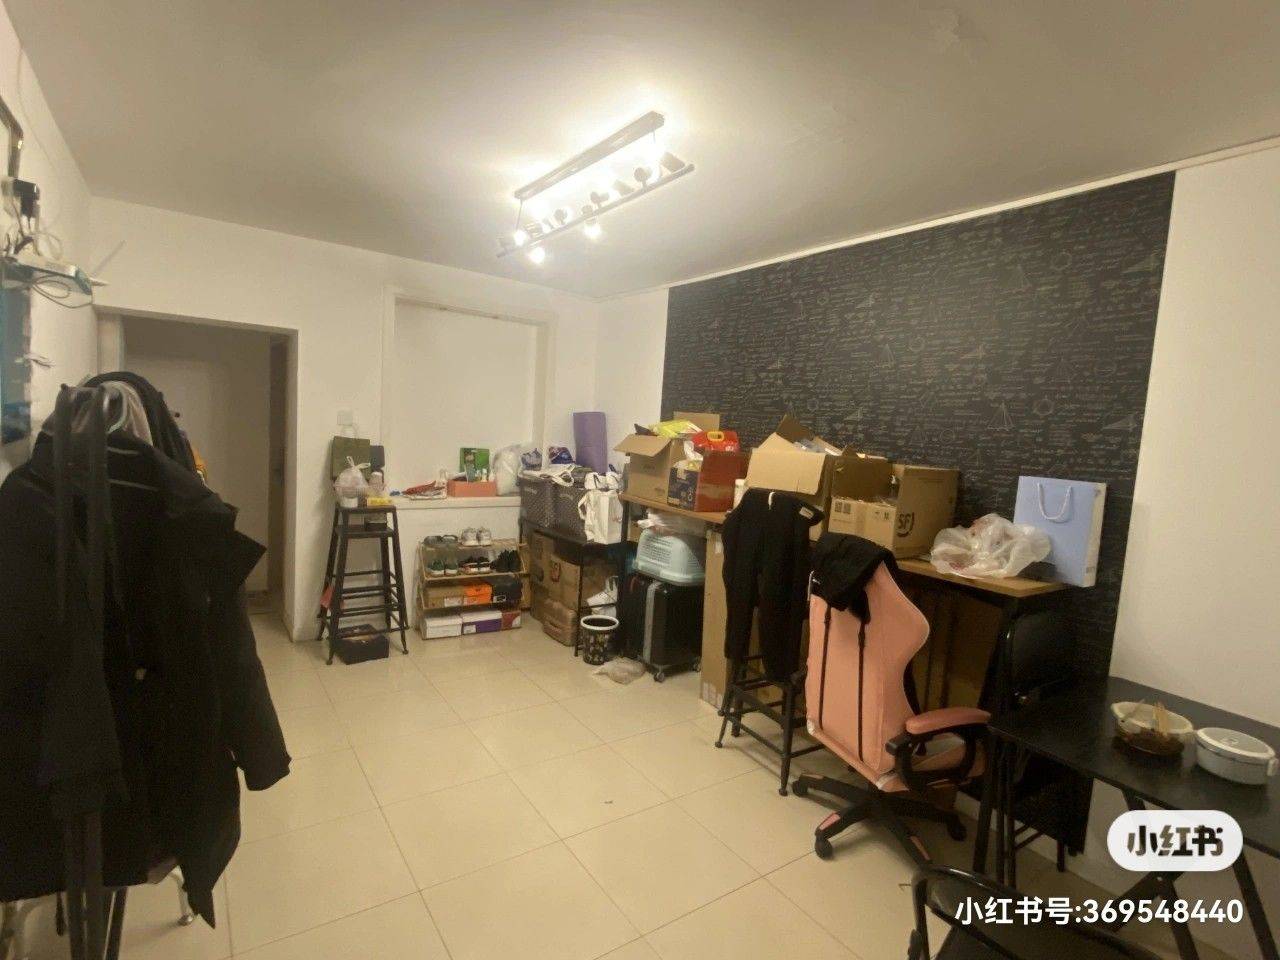 Beijing-Fengtai-Cozy Home,Clean&Comfy,No Gender Limit,Chilled